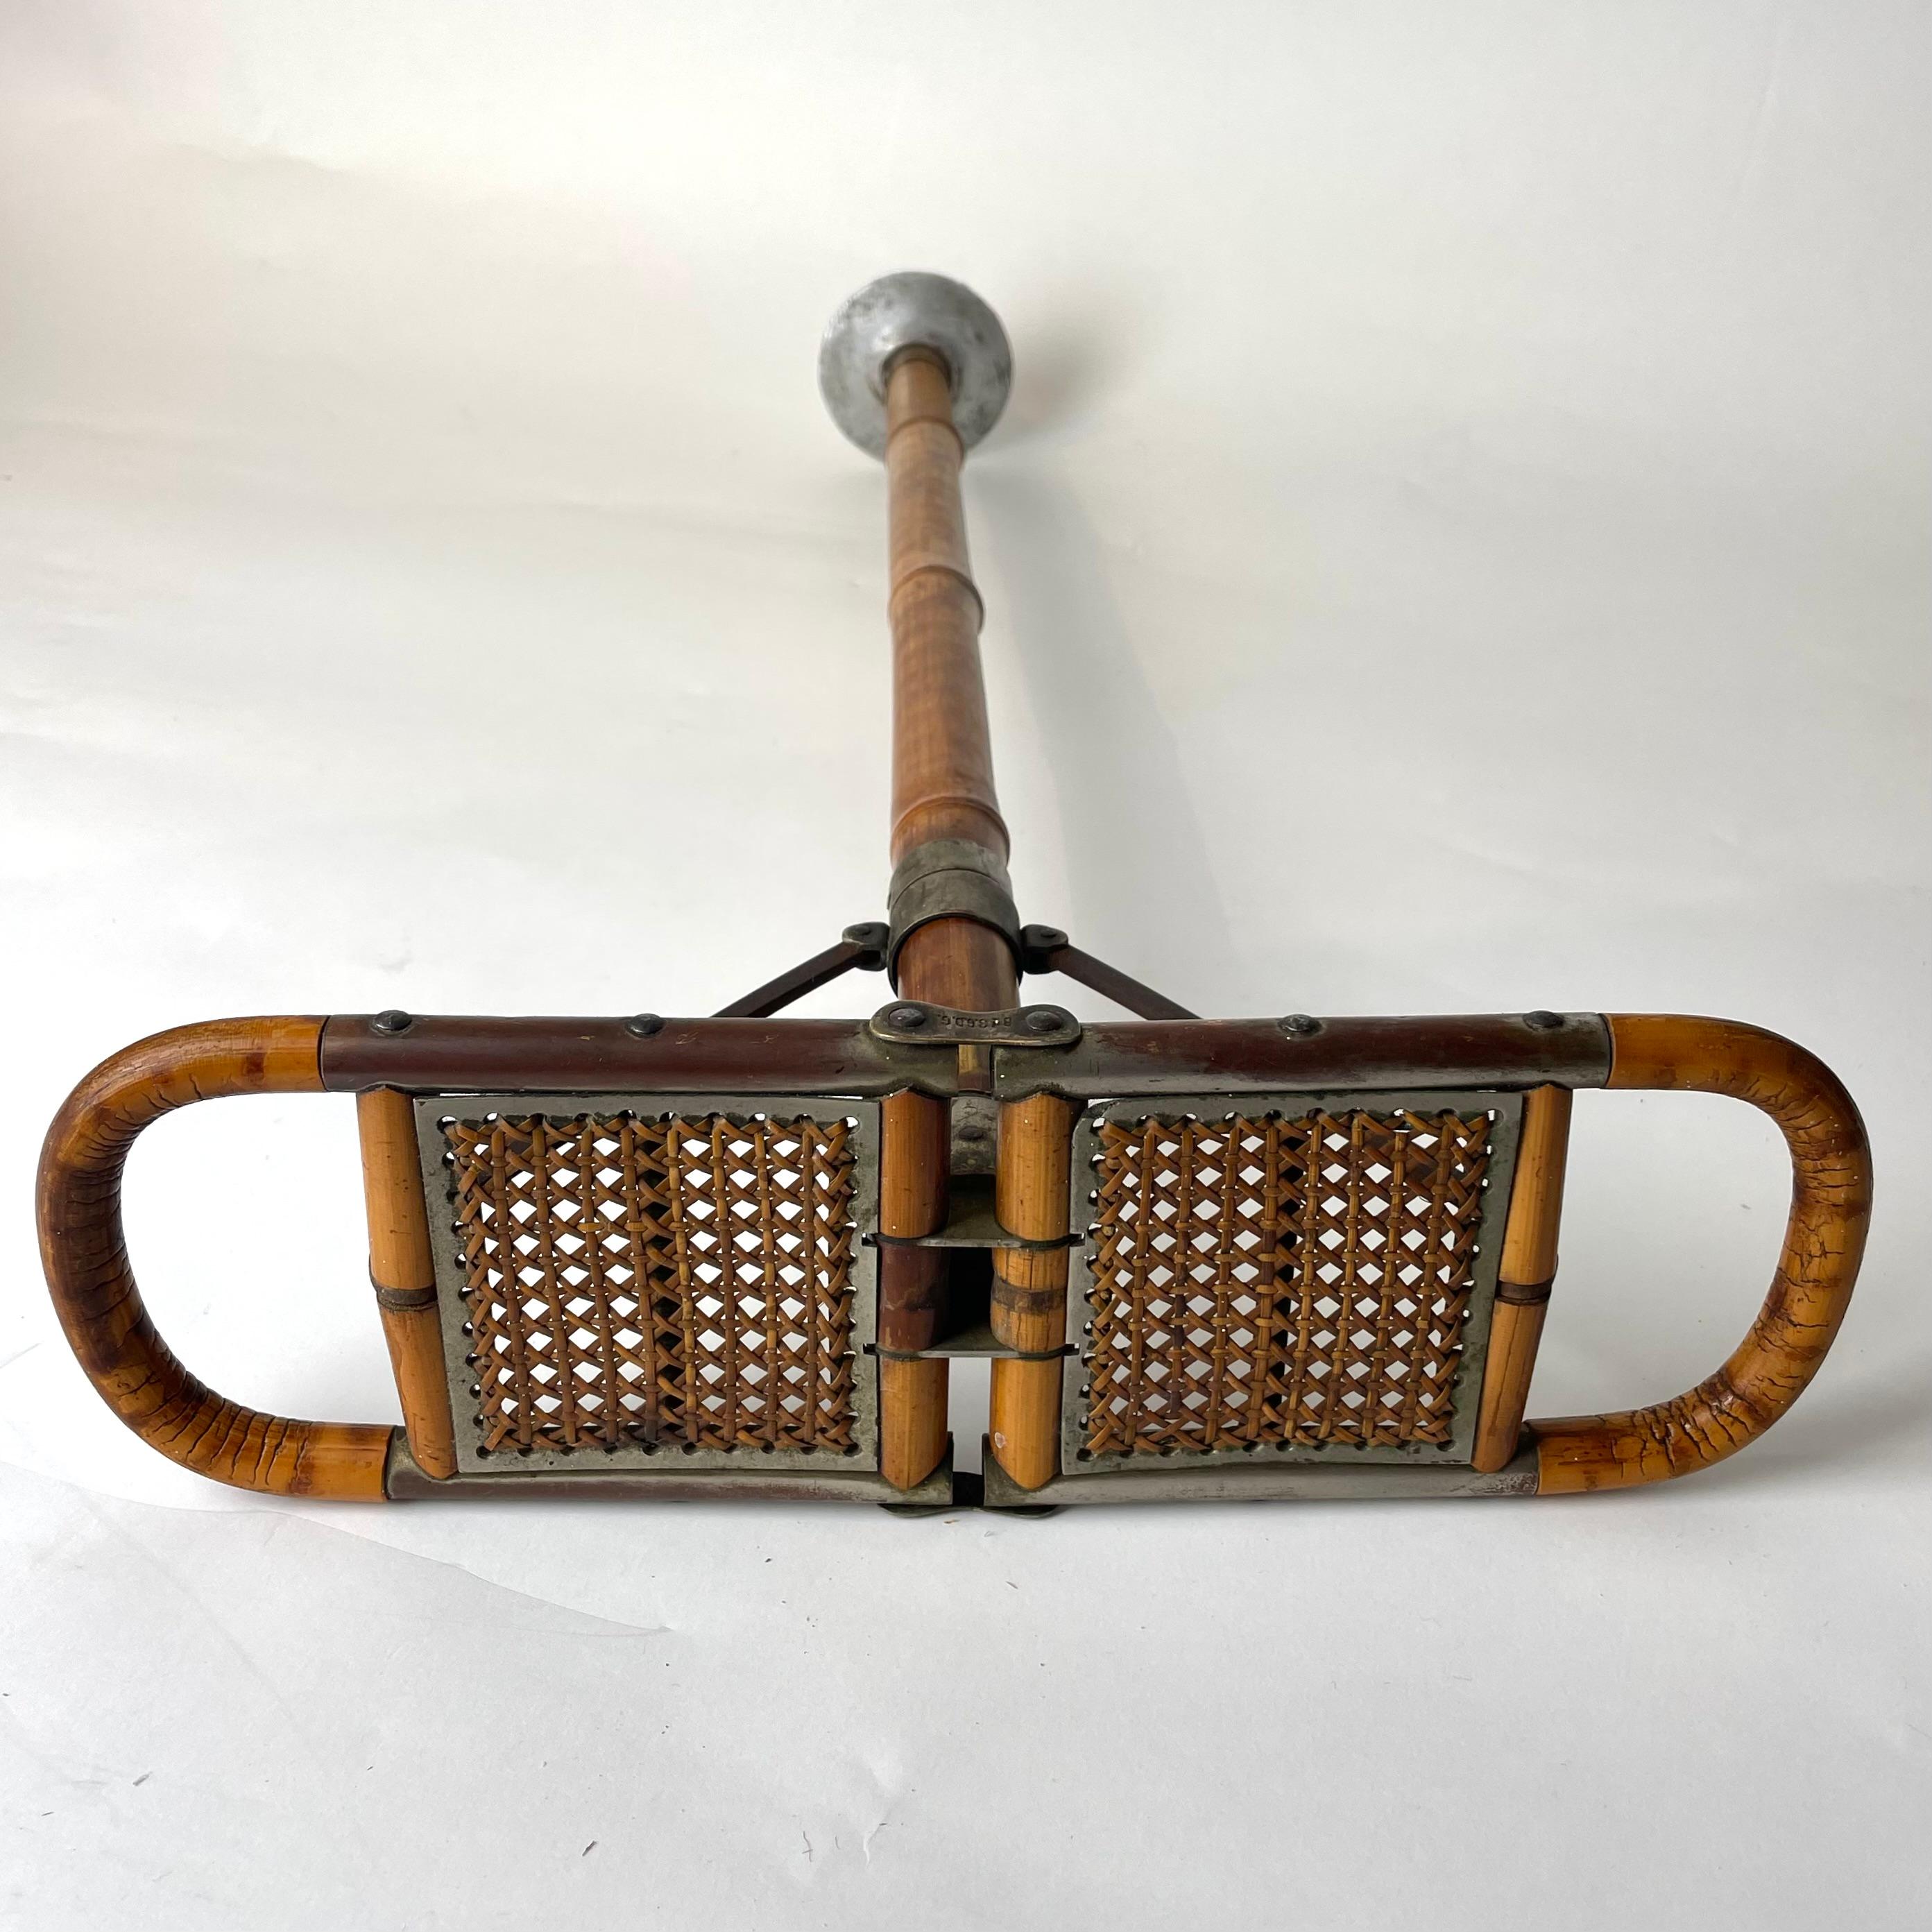 19th Century Walking Cane with Folding Seat, Bamboo and Rattan Late 19th/Early 20th Century